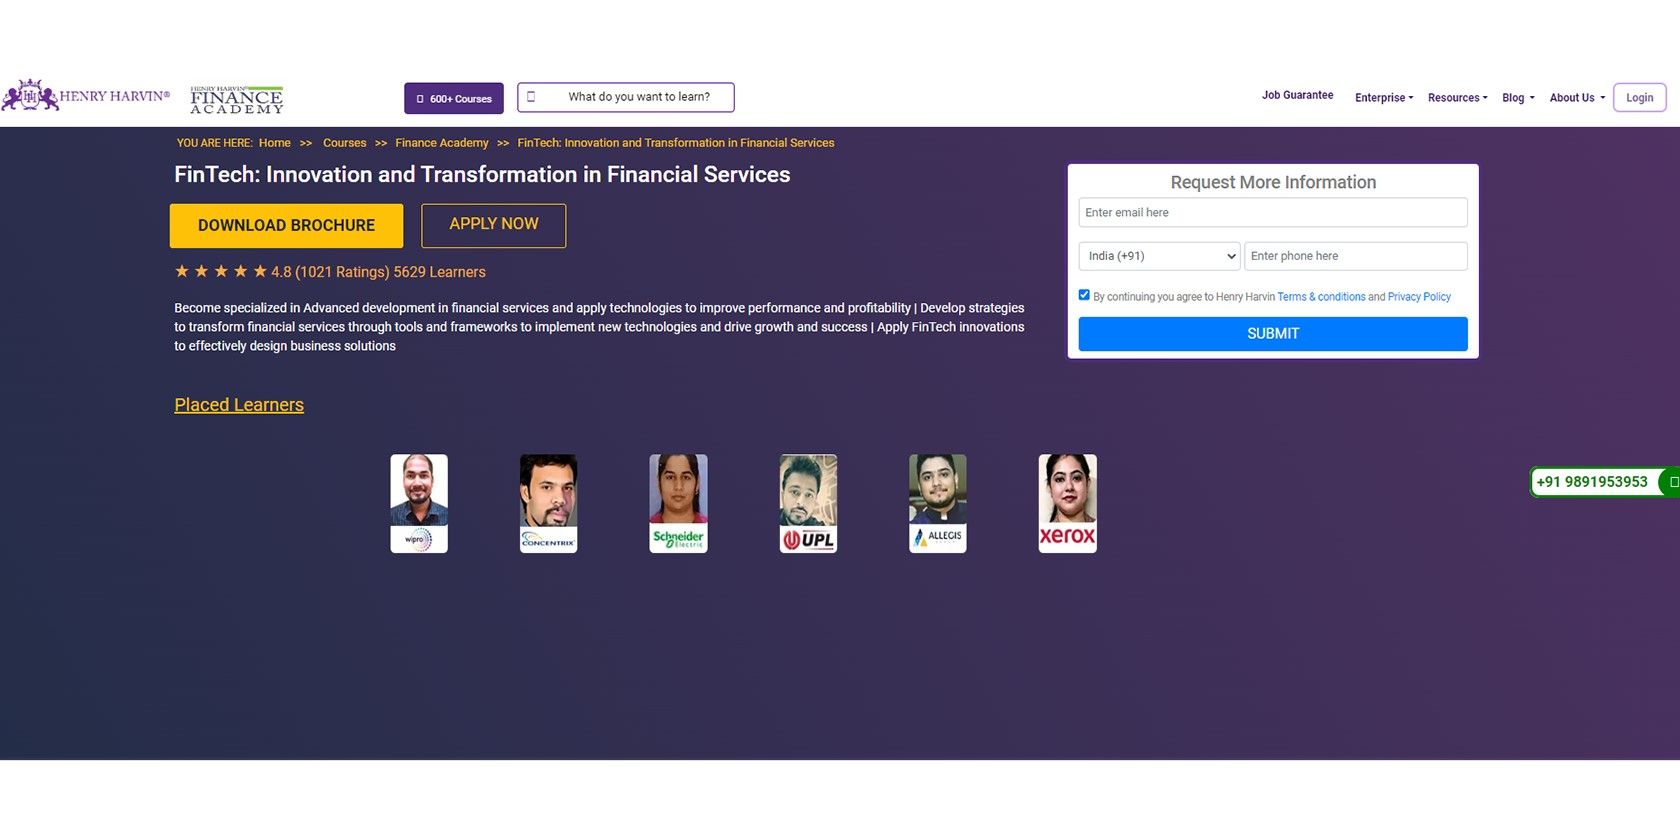 Fintech Innovation and Transformation in Financial Services Course screenshot